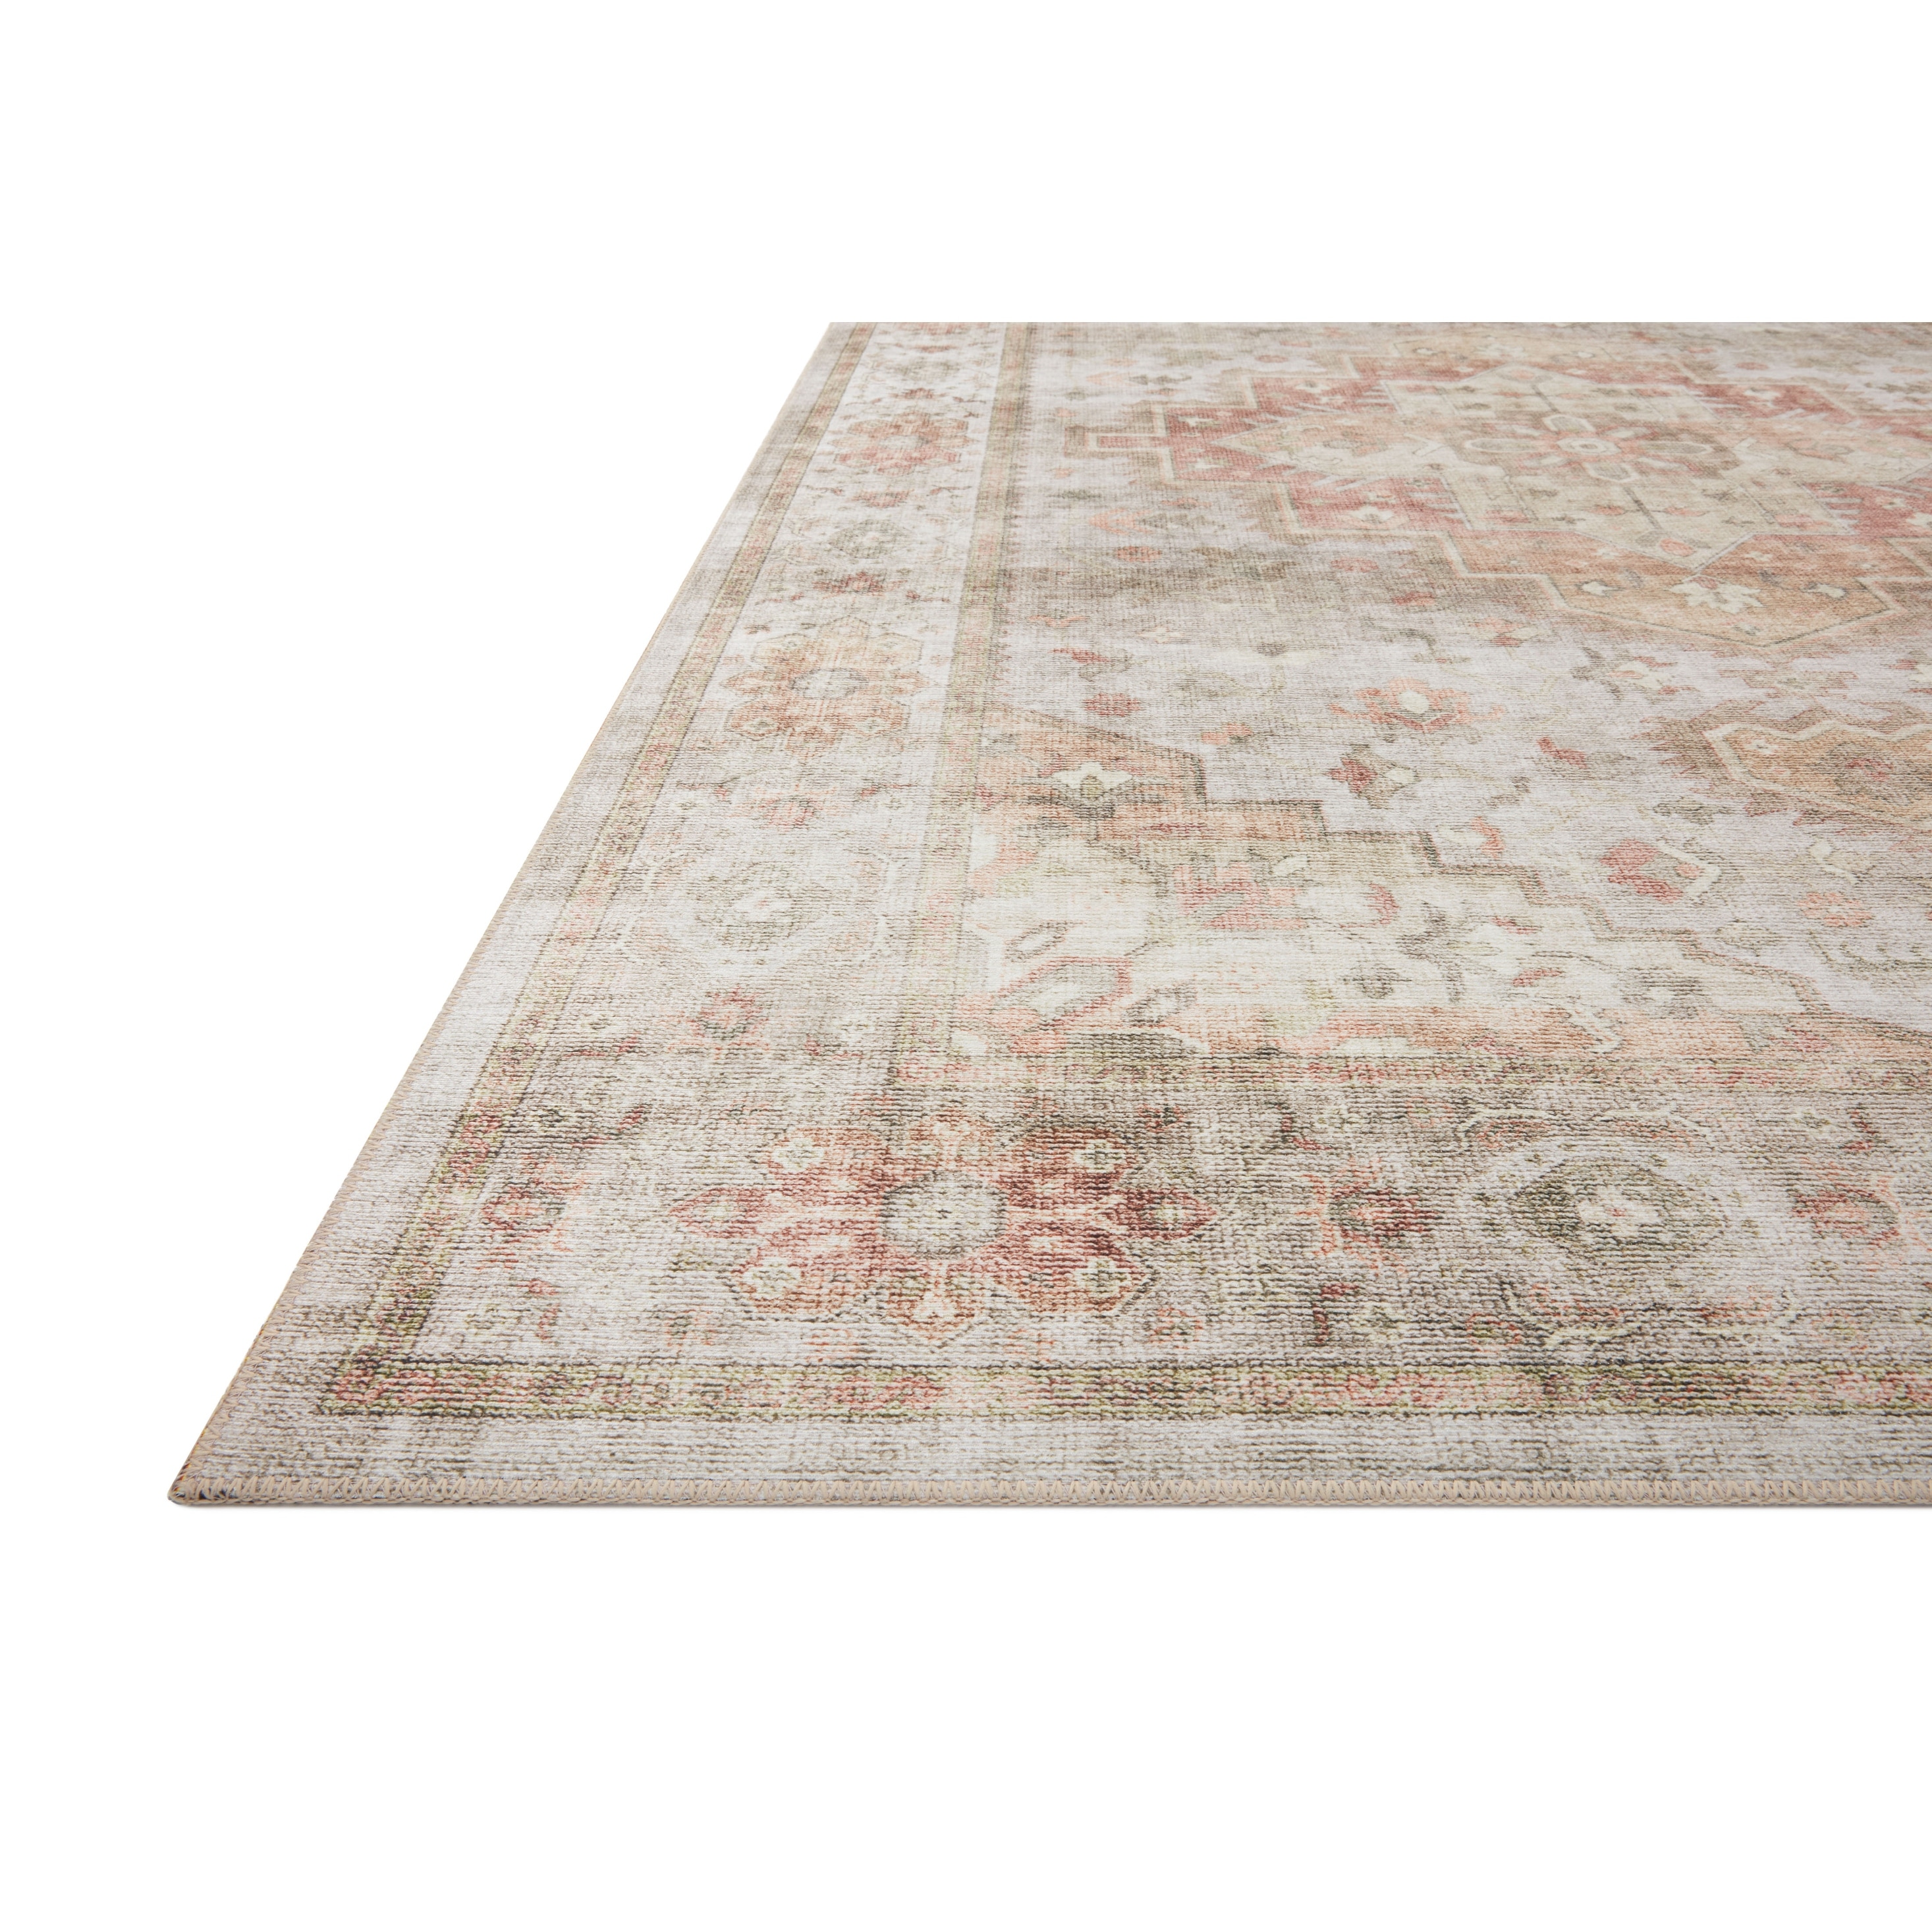 https://ak1.ostkcdn.com/images/products/is/images/direct/f00d3b84d04c513e1f01153b68188f282afbd23f/Alexander-Home-Meghan-Vintage-Traditional-Distressed-Area-Rug.jpg